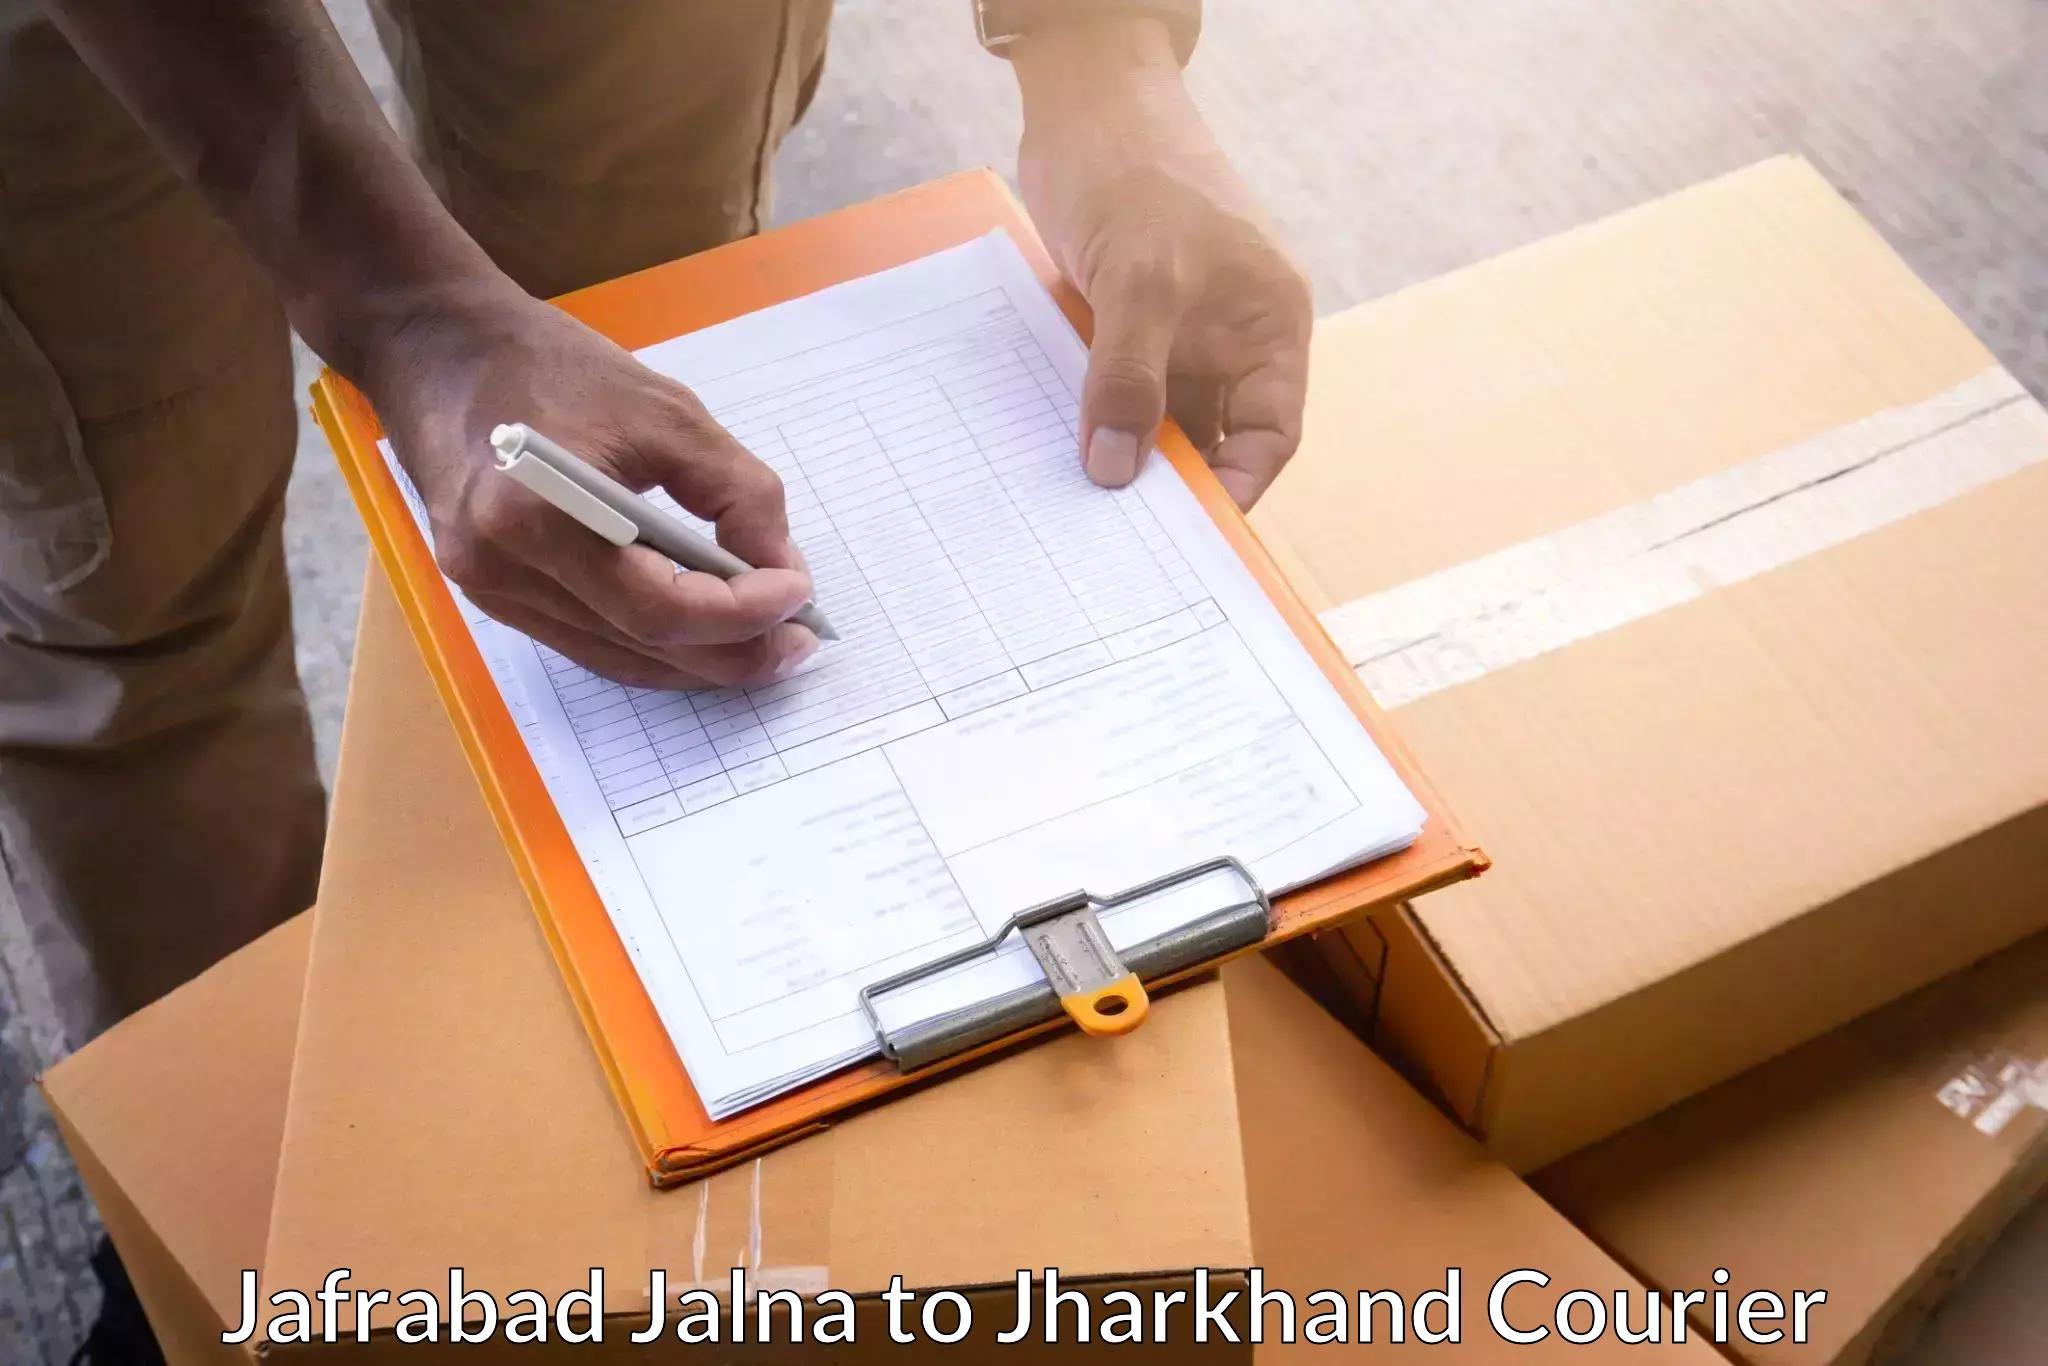 Express delivery solutions Jafrabad Jalna to Topchanchi